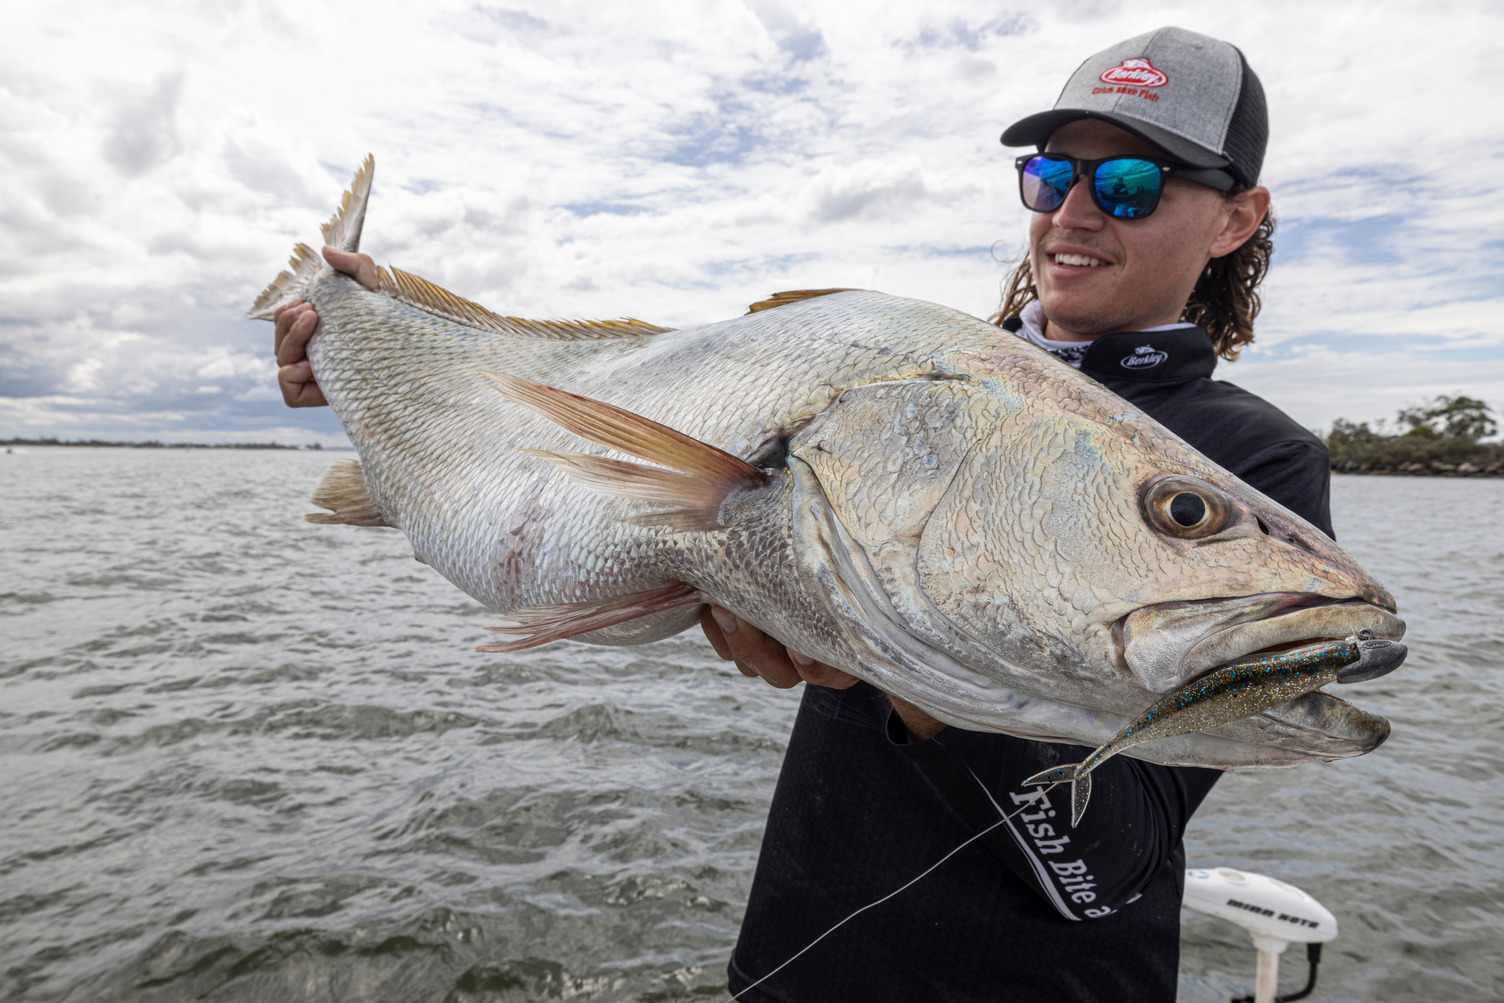 Lures for Jewfish/Mulloway, Soft Vibes and Plastics